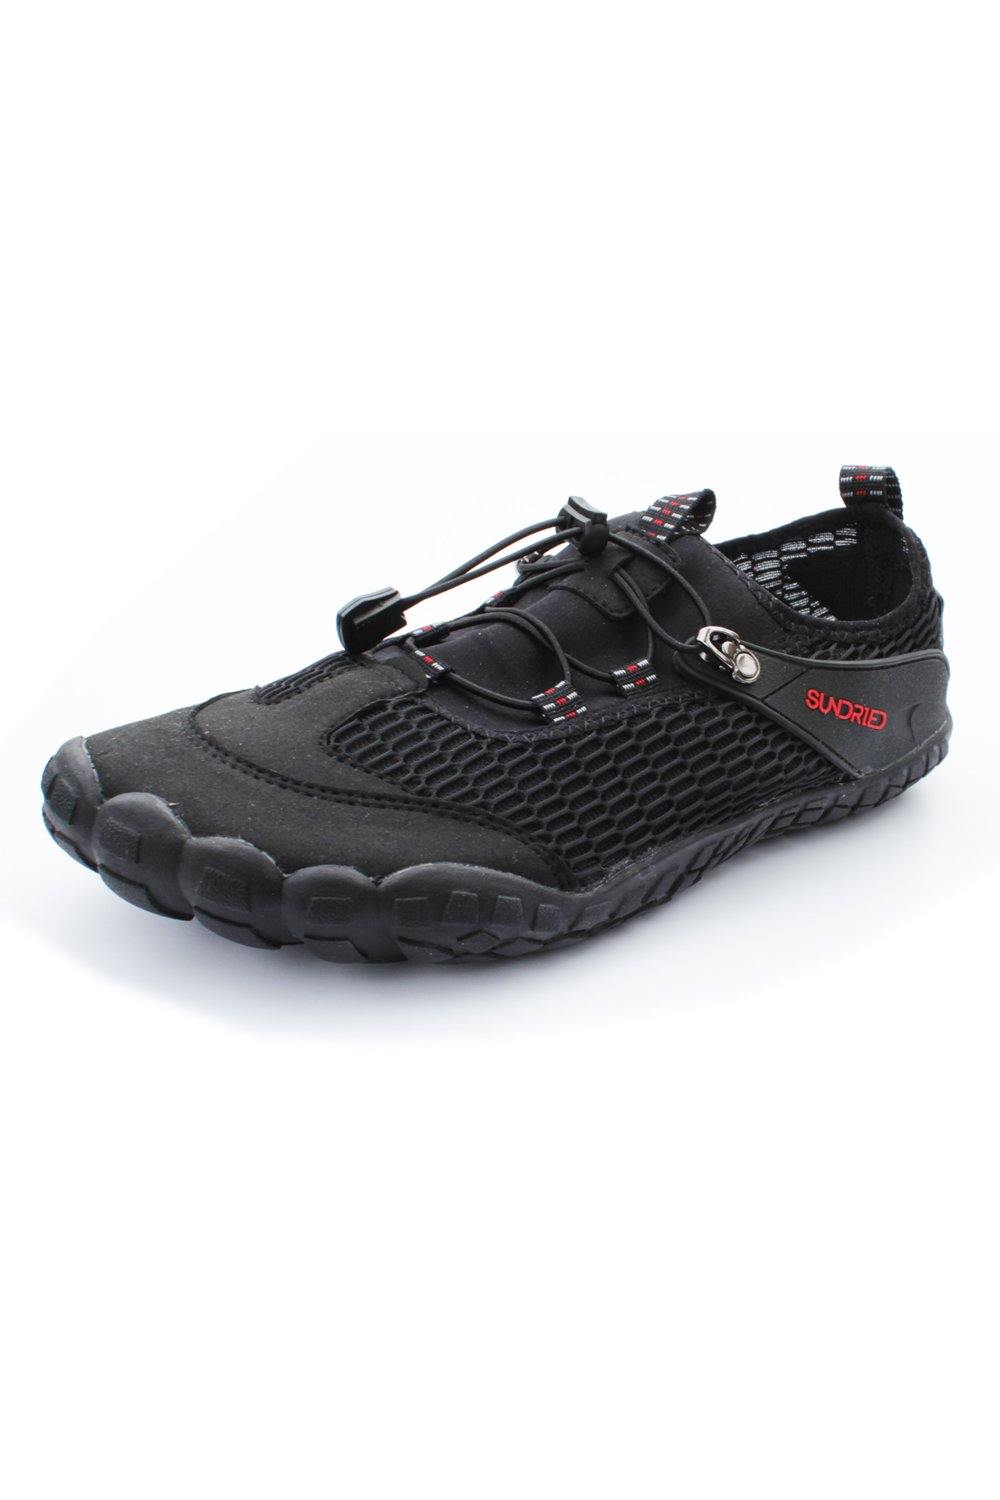 Sundried Women's Barefoot Shoes 2.5 Shoes Activewear